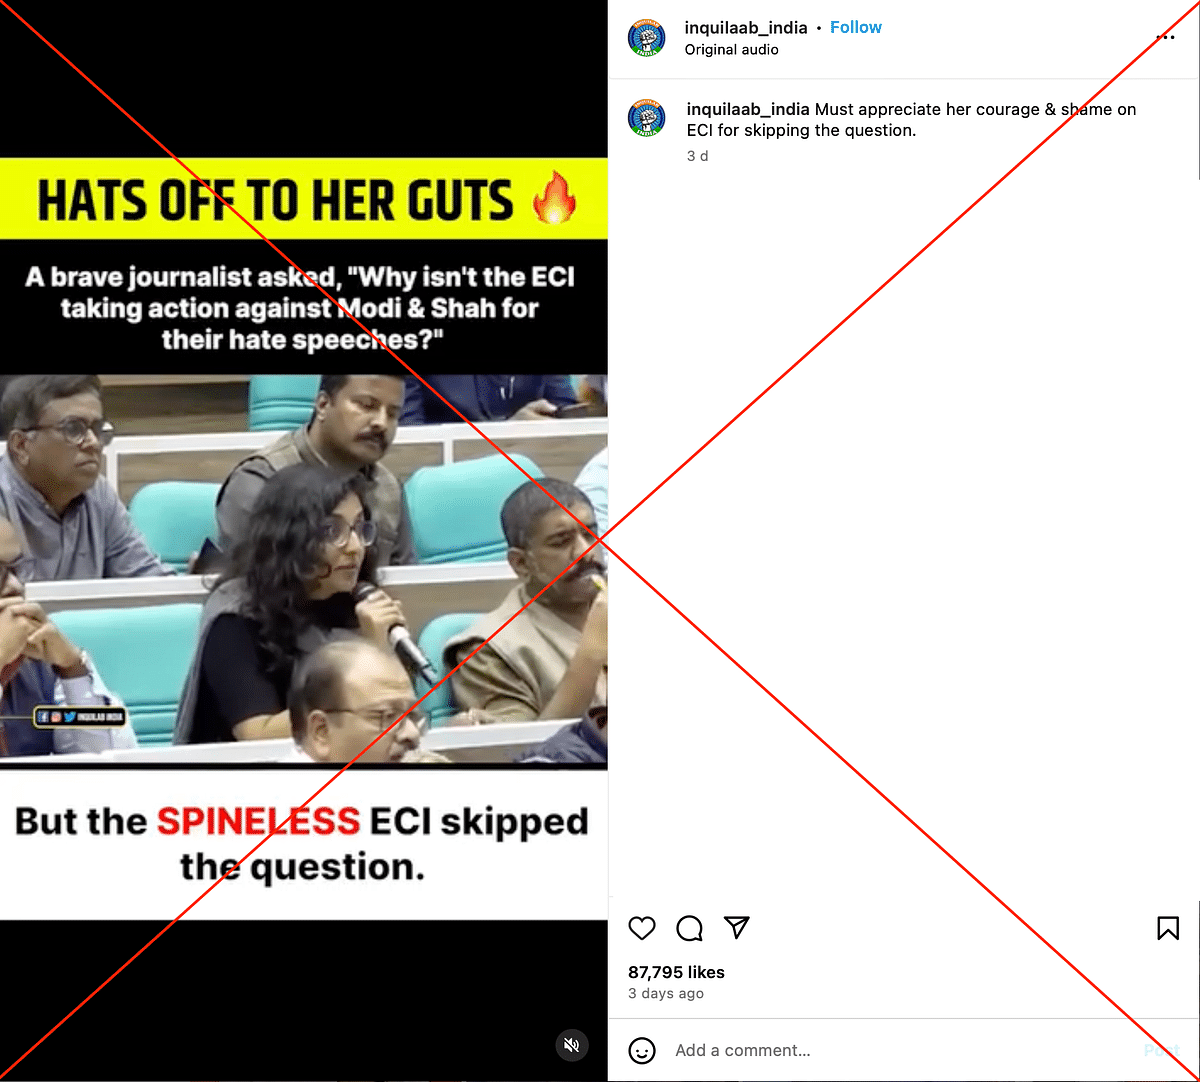 This video is clipped. The CEC responded to the question on no action against PM Modi and Amit Shah for hate speech.